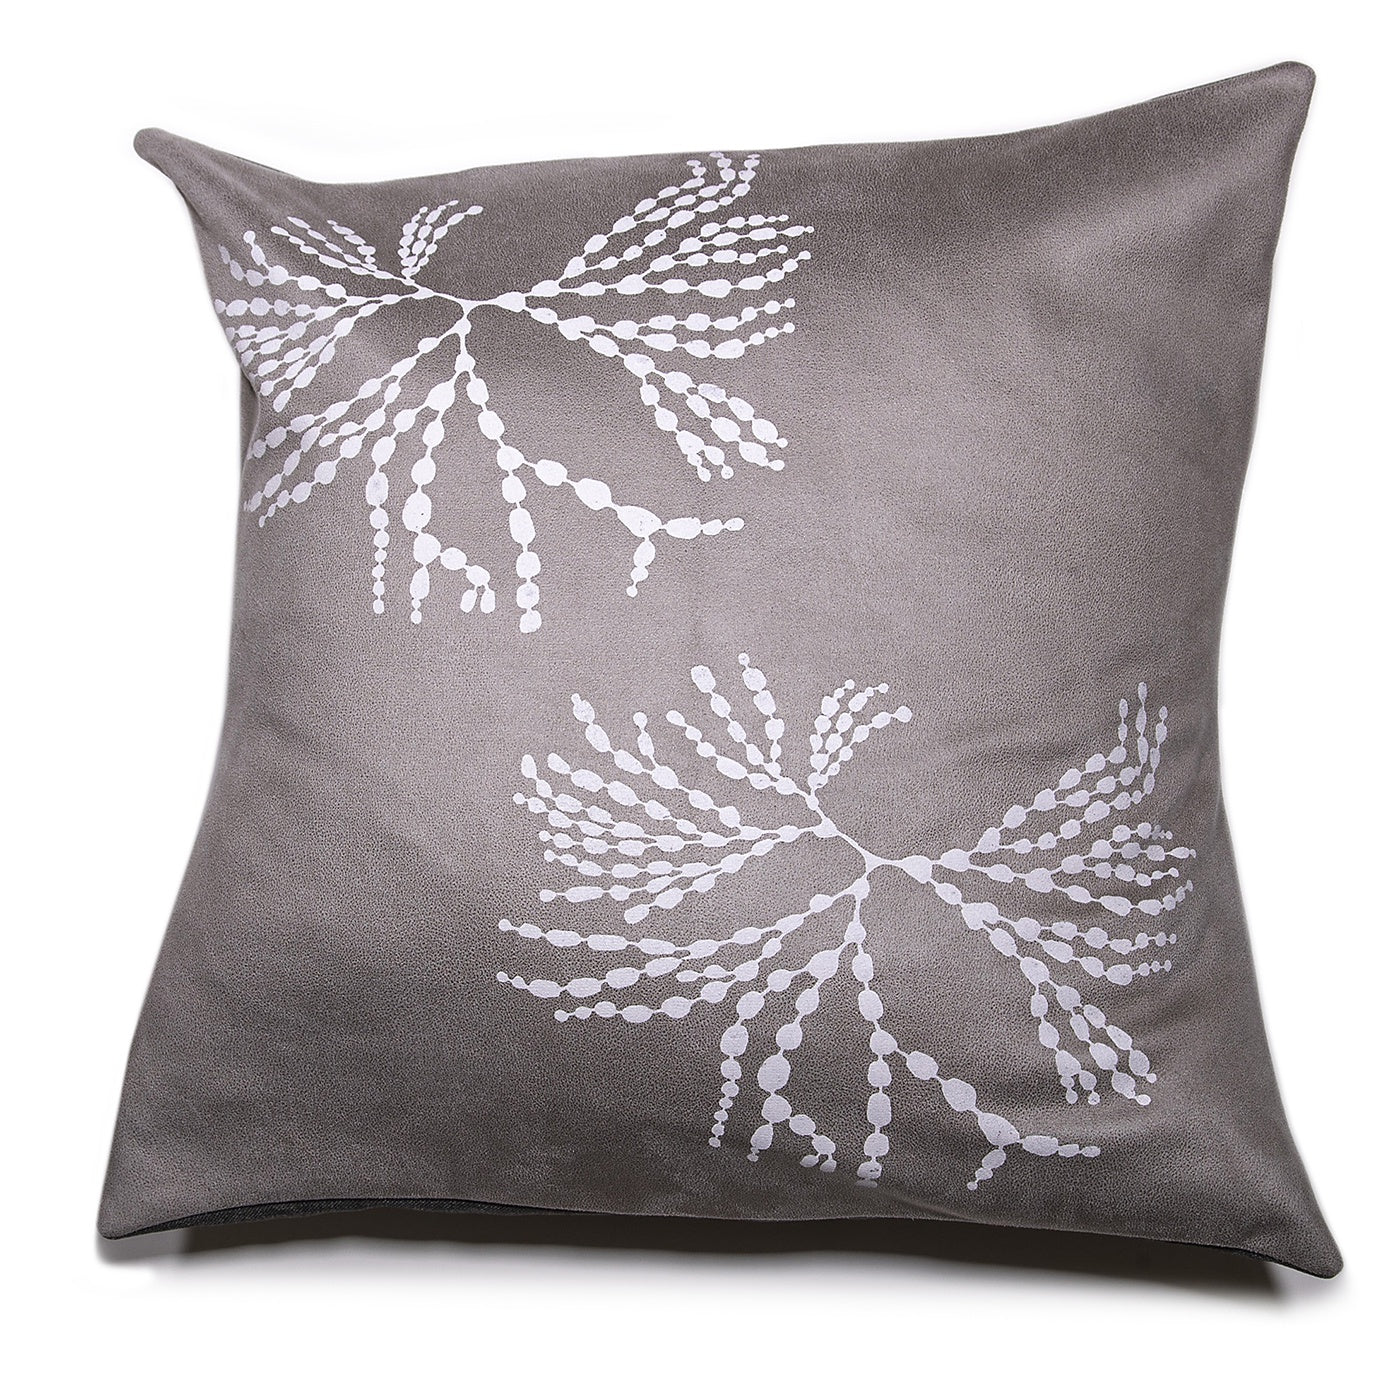 Stalley Textile Co. - Cushion Cover - Bubbleweed - White on Light Grey